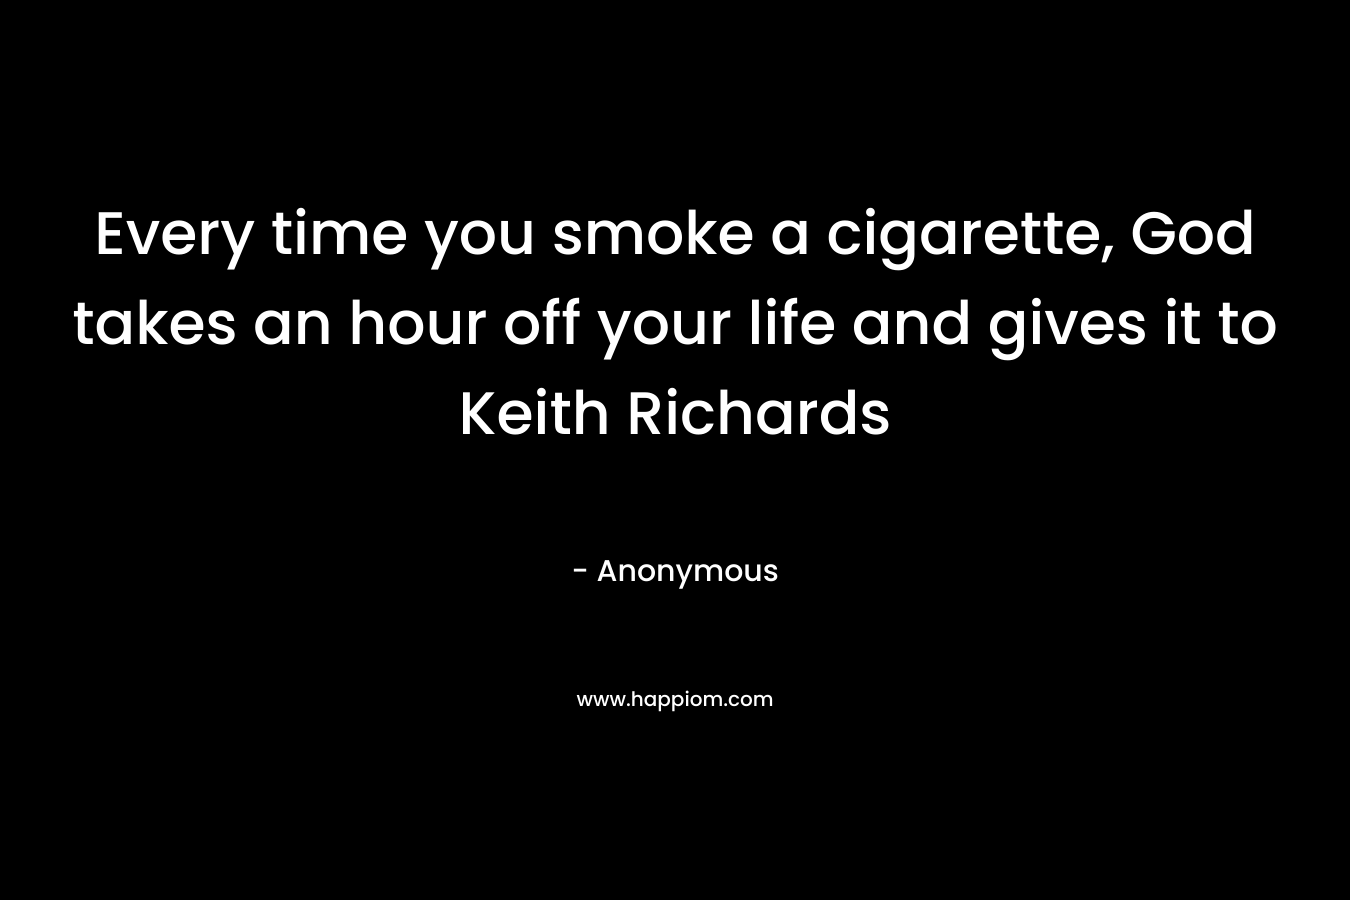 Every time you smoke a cigarette, God takes an hour off your life and gives it to Keith Richards